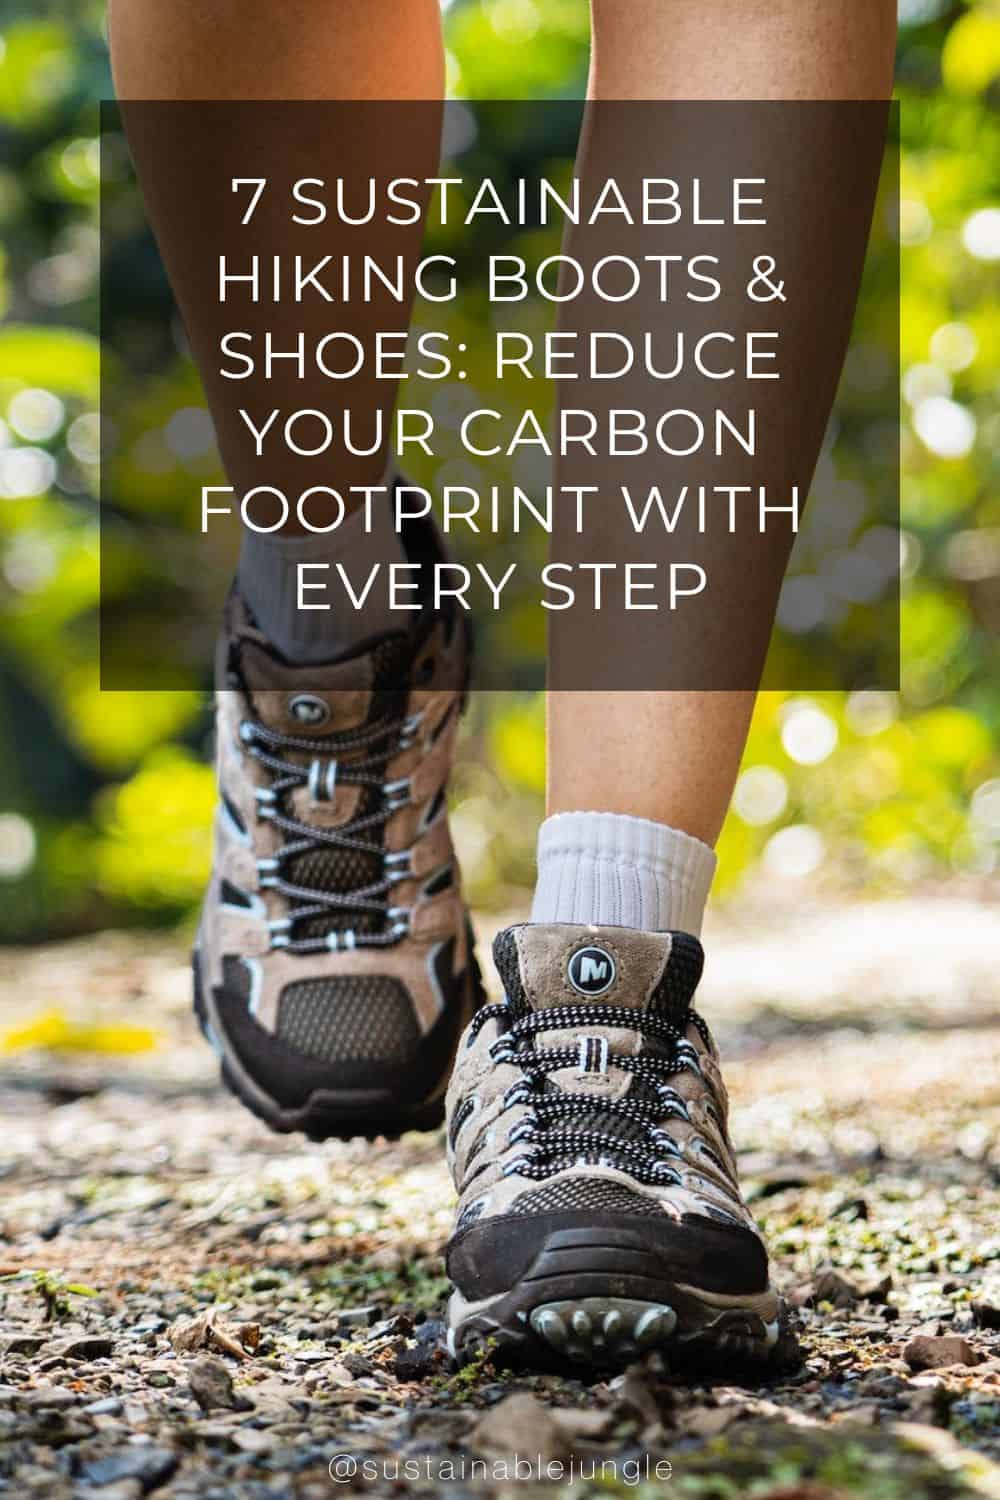 7 Sustainable Hiking Boots & Shoes: Reduce Your Carbon Footprint With Every Step Image by Merrell #sustainablehikingboots #sustainablehikingshoes #ecofriendlyhikingboots #ecofriendlyhikingshoes #sustainablewaterproofhikingboots #bestsustainablehikingboots #sustainablejungle